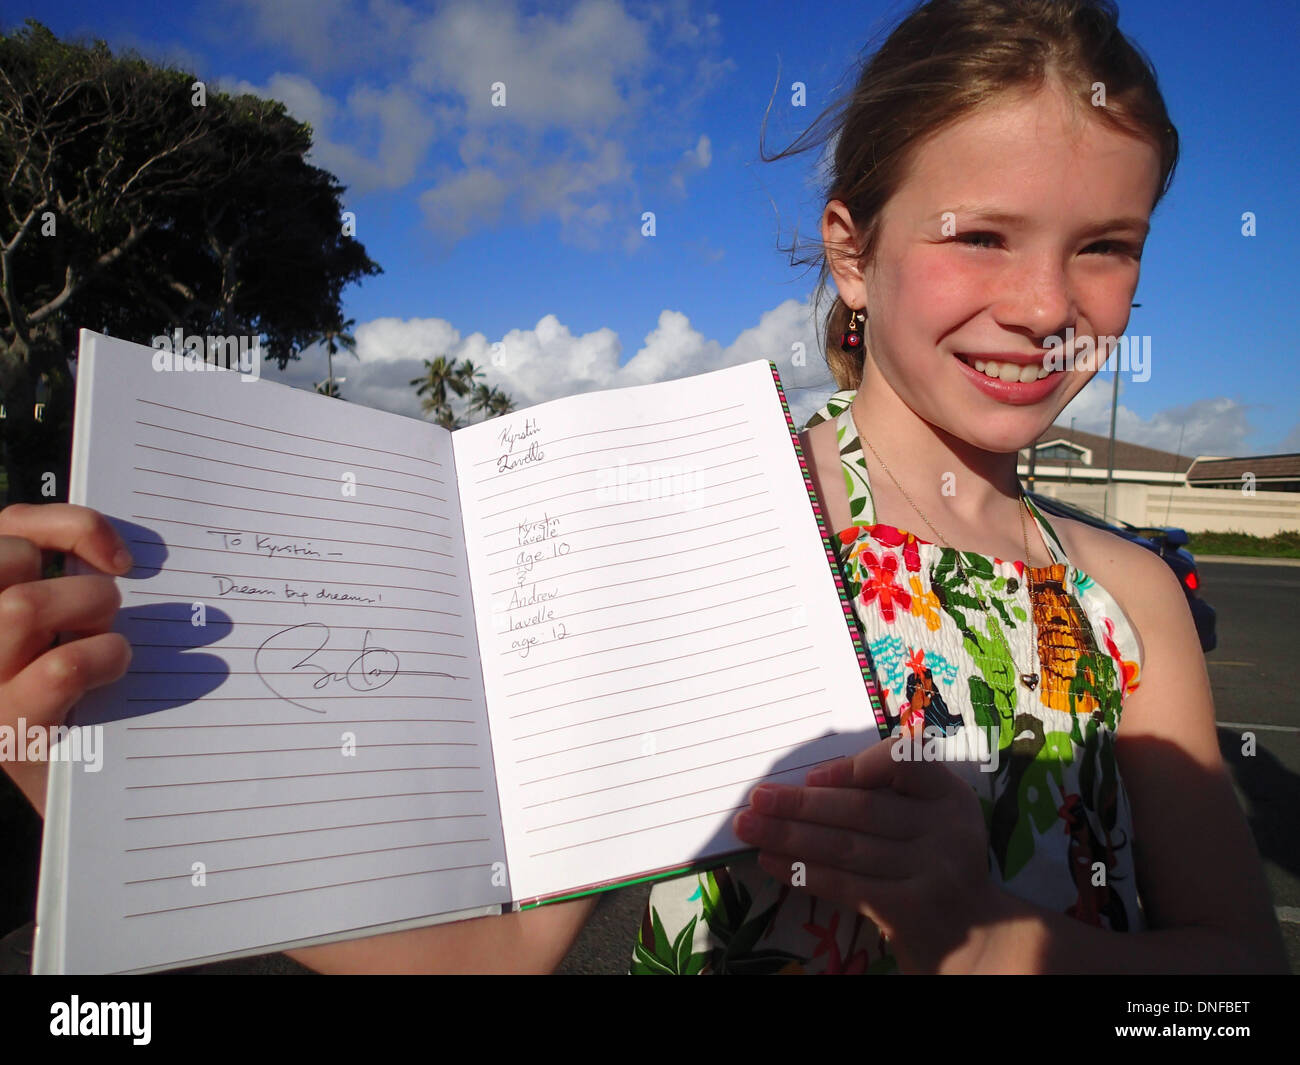 10-year-old Kyrstin Lavelle visiting from Toronto, Canada holds her notebook with a short quote, "Dream Big Dreams" with United States President Barack Obama's signature outside the McDonalds at Marine Corps Base Hawaii. Kyrstin was visiting her father who is active military outside the gym where President Obama exercises and shot a few baskets earlier this morning, December 24, 2013. Credit: Cory Lum / Pool via CNP Stock Photo